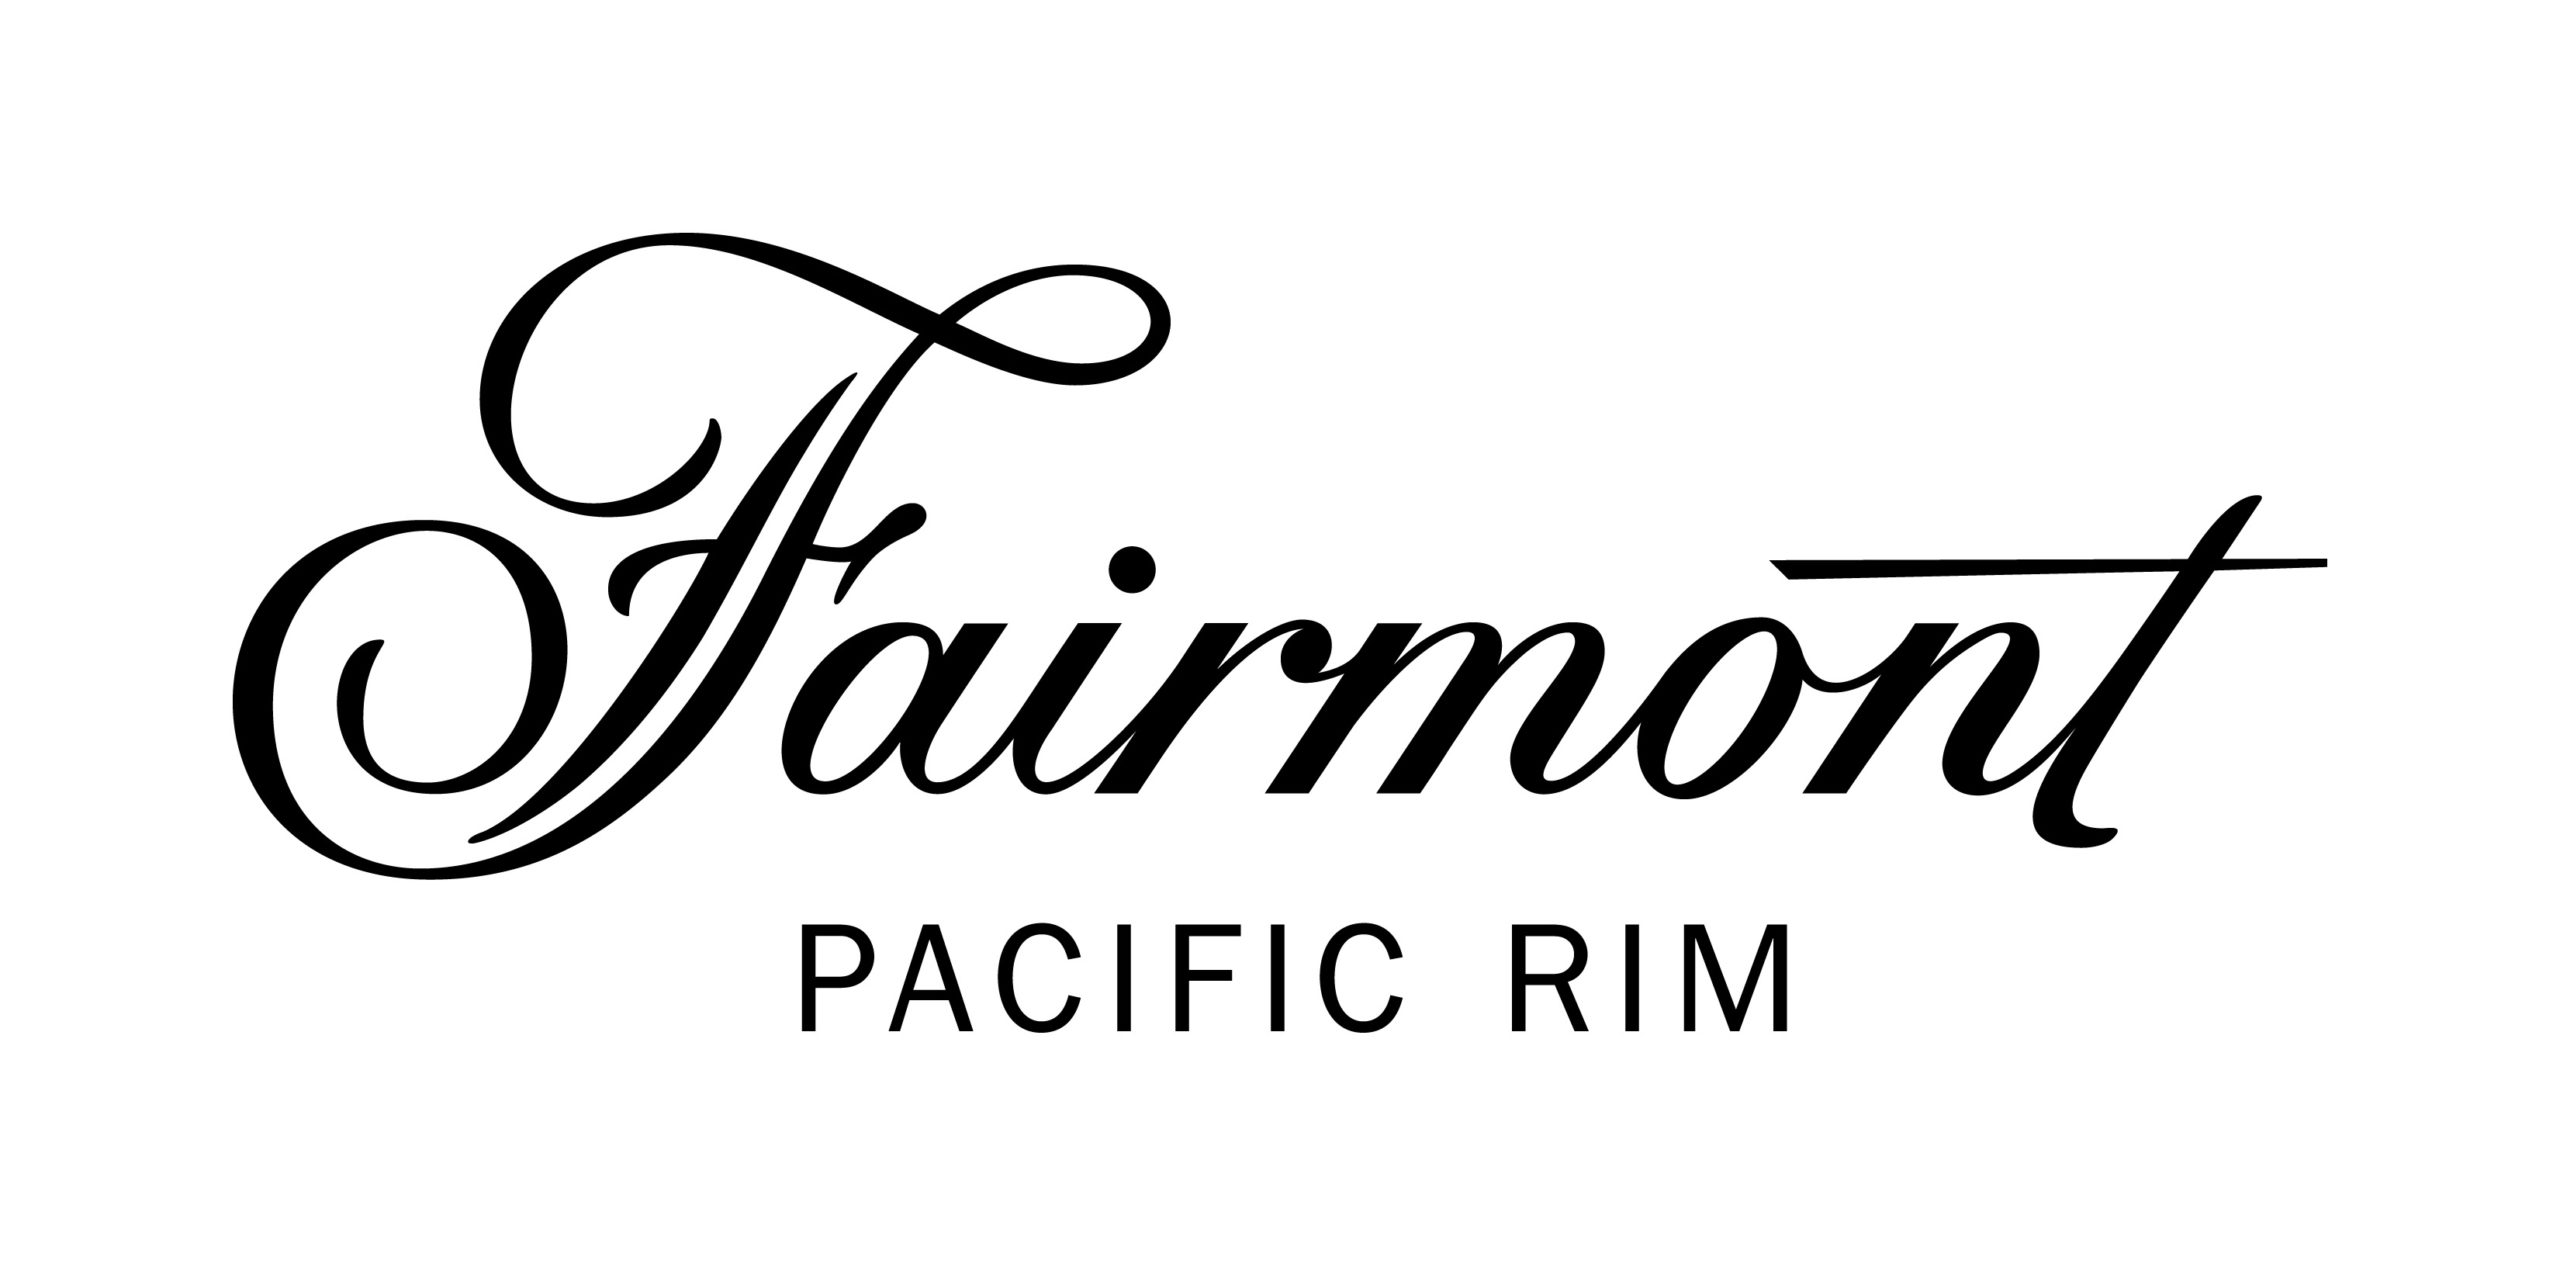 Fairmont Pac Rim - Corby Spirit and Wine Limited